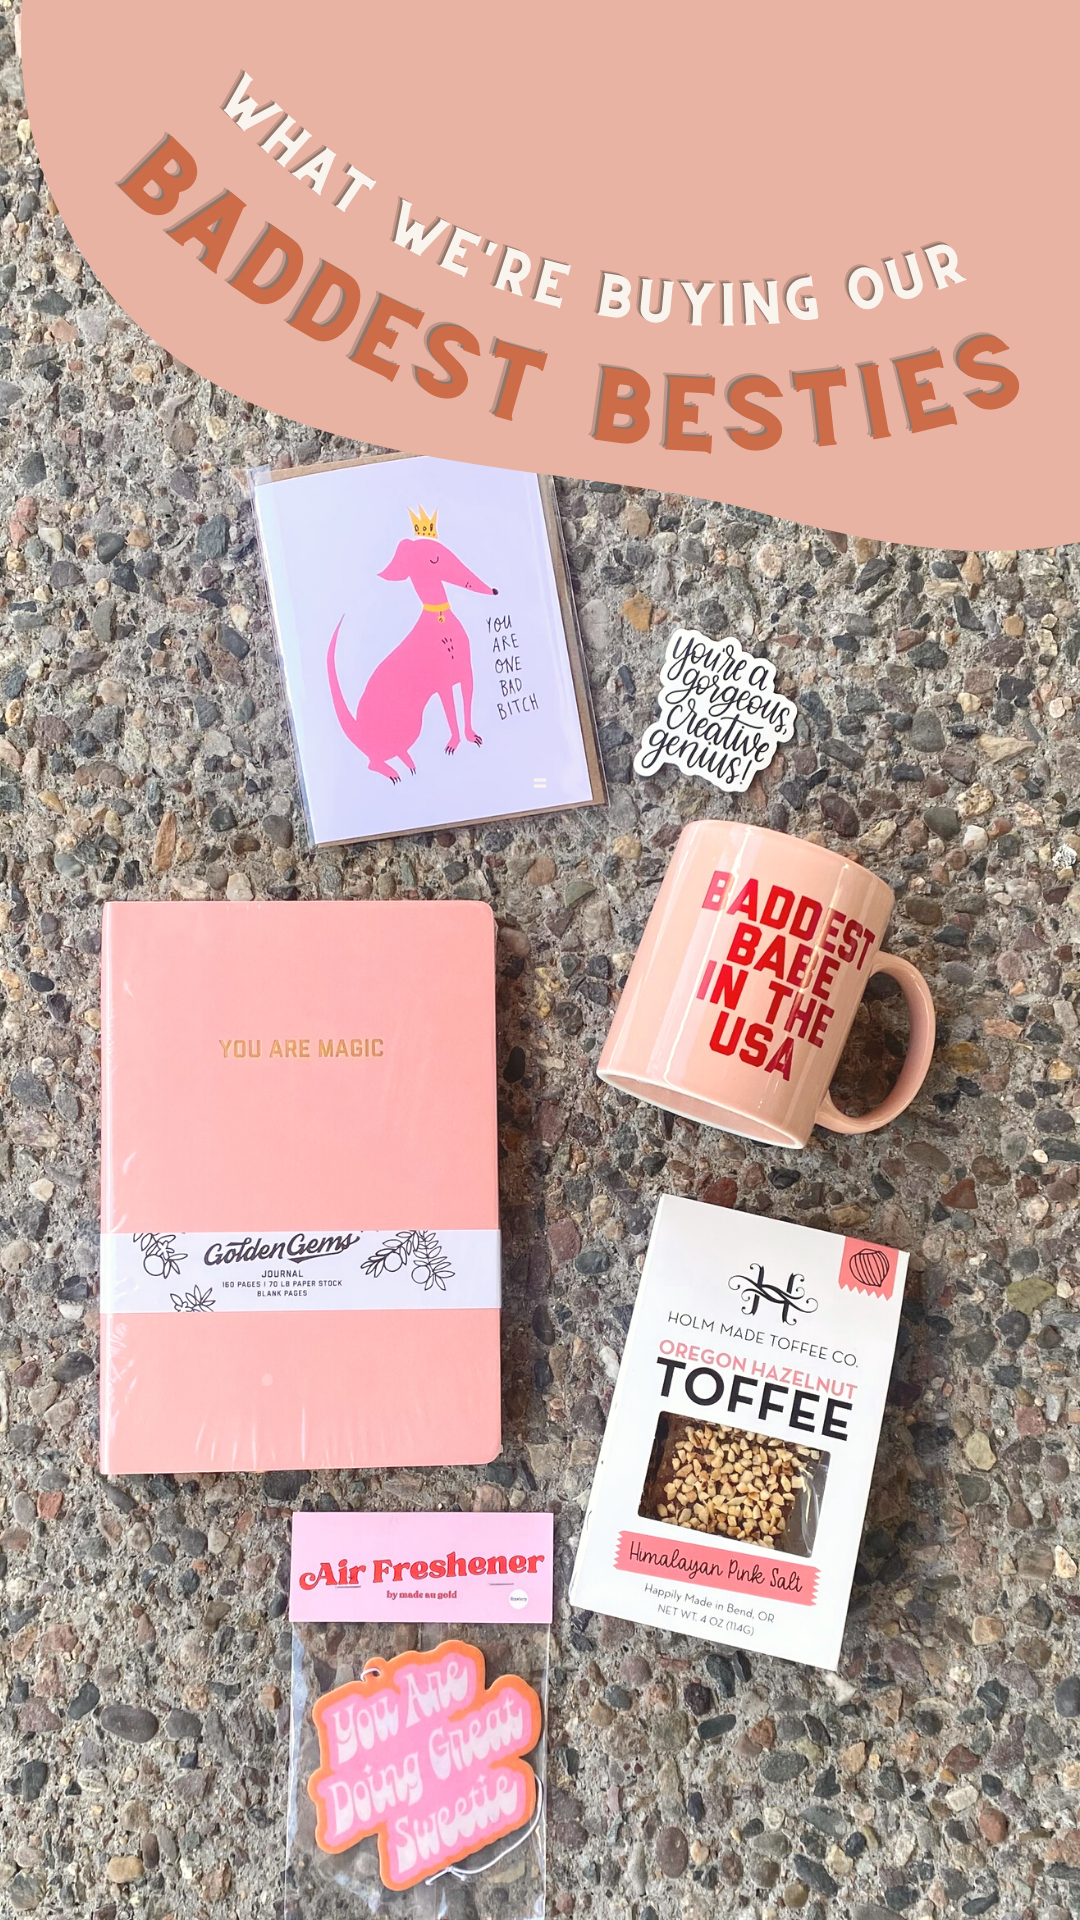 Instagram post "what we're buying our baddest besties" and a card, sticker, mug, candy, air freshener, and journal in the photo